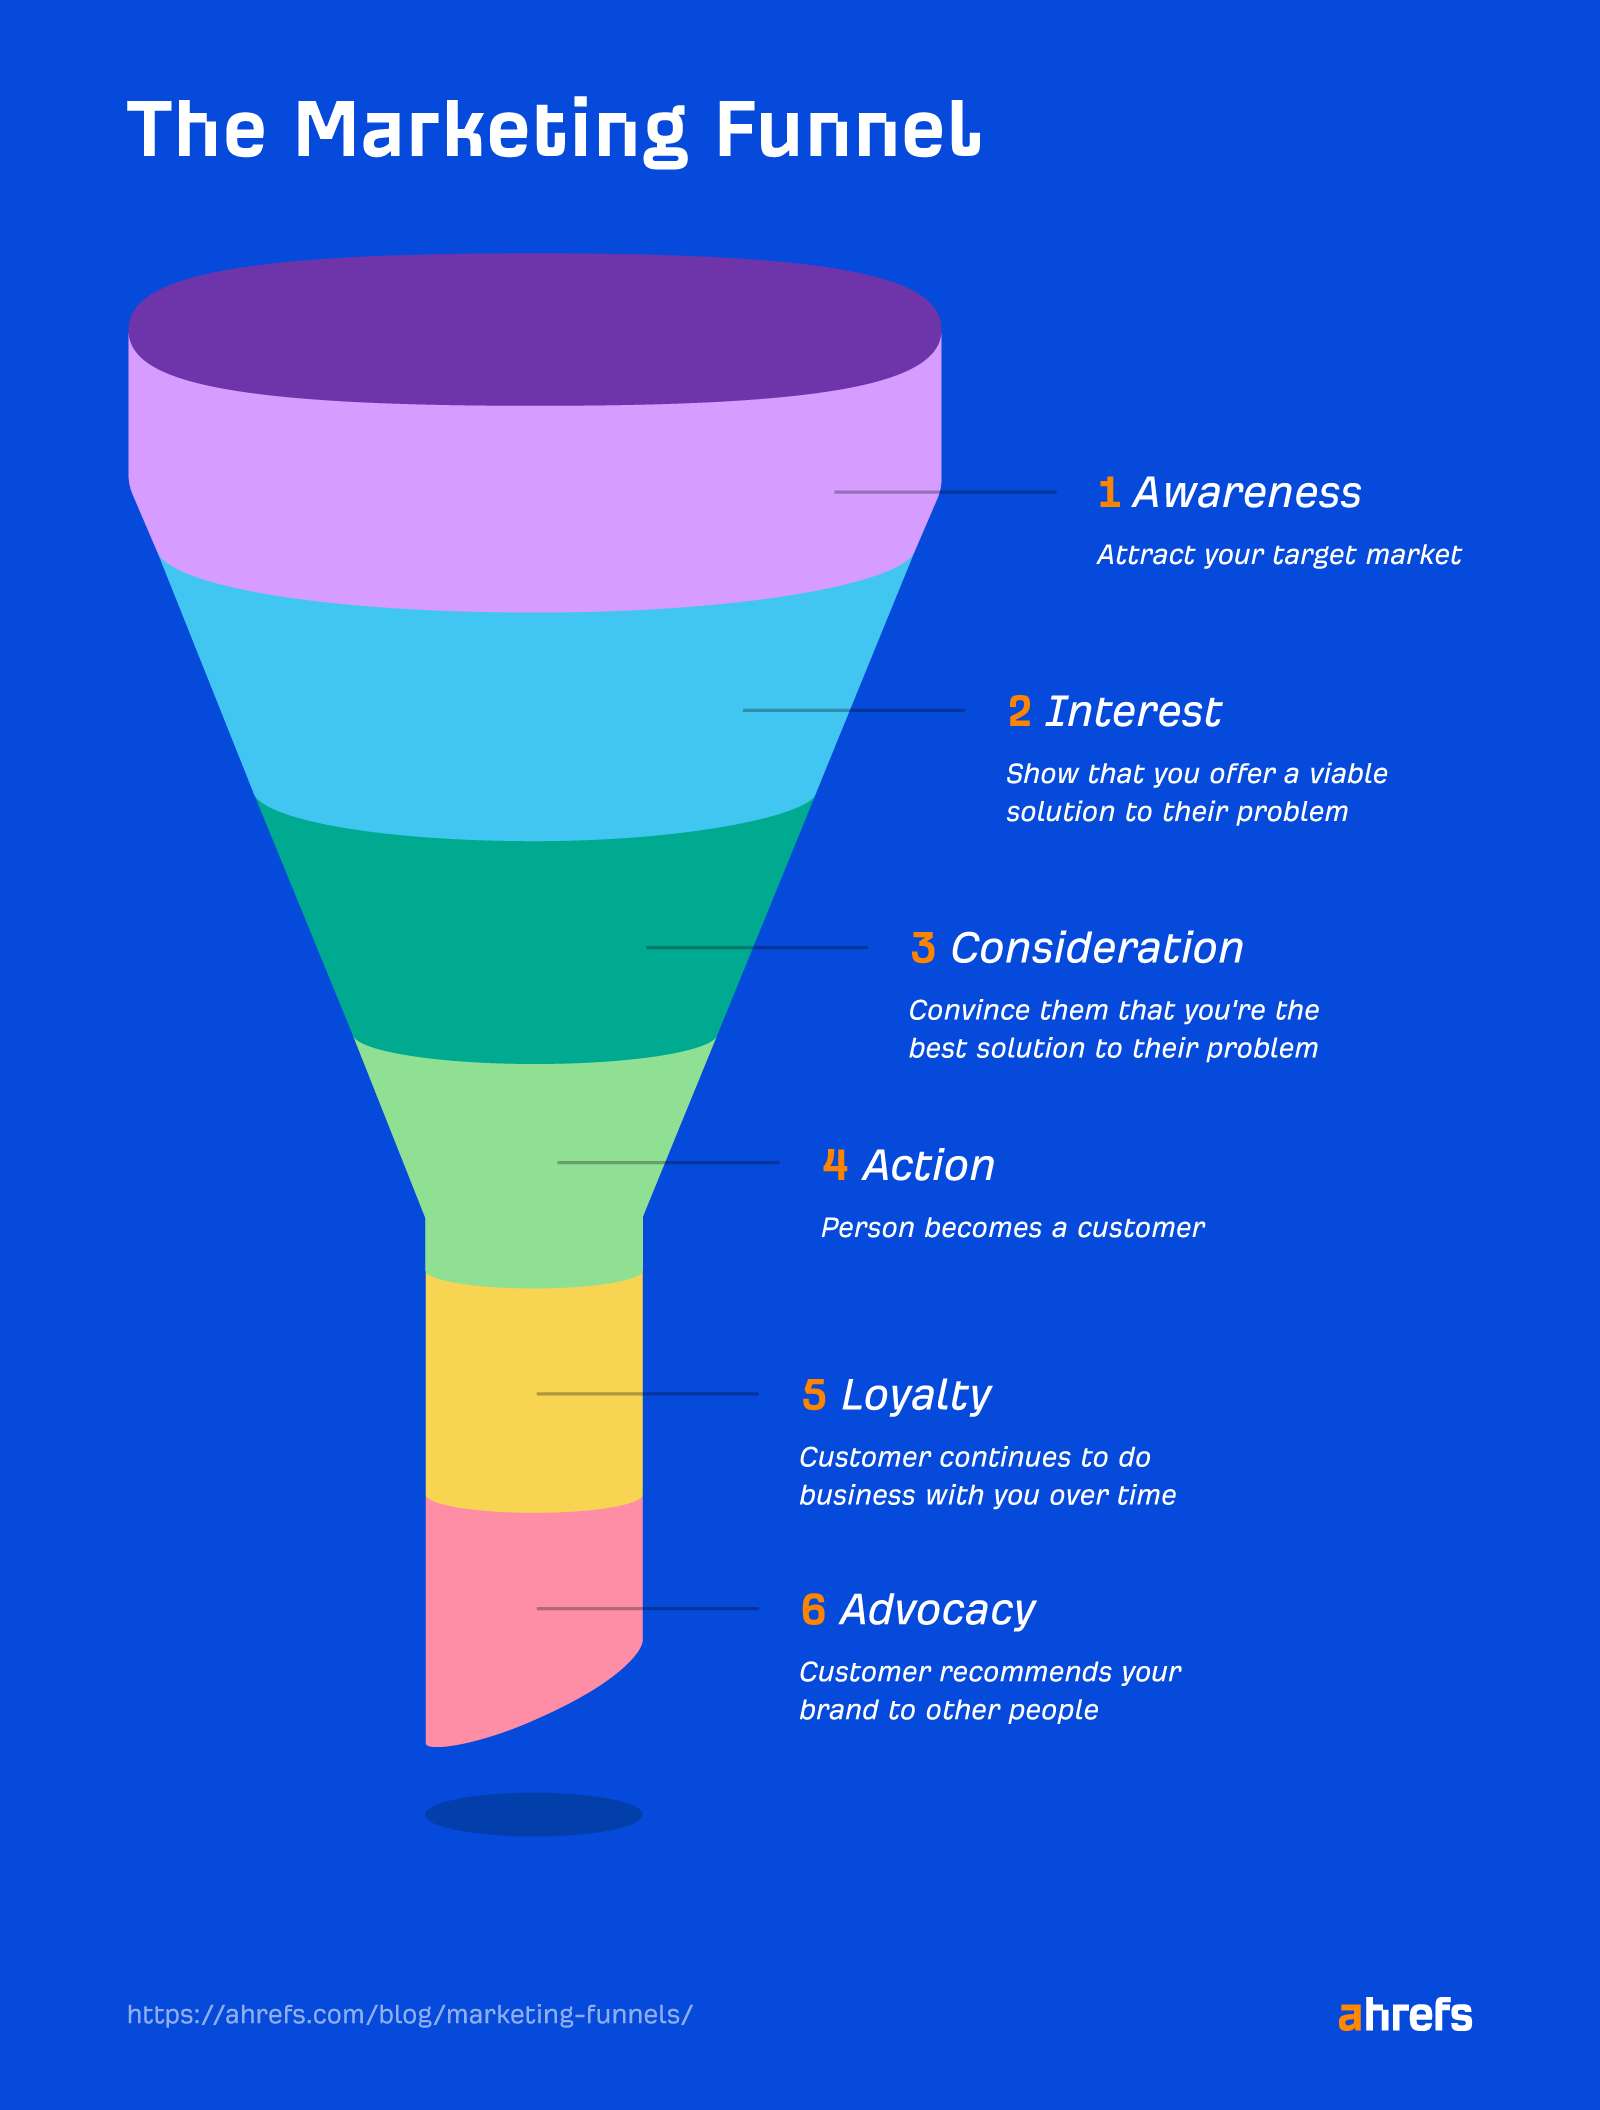 Marketing funnel with two post-purchase additional stages.